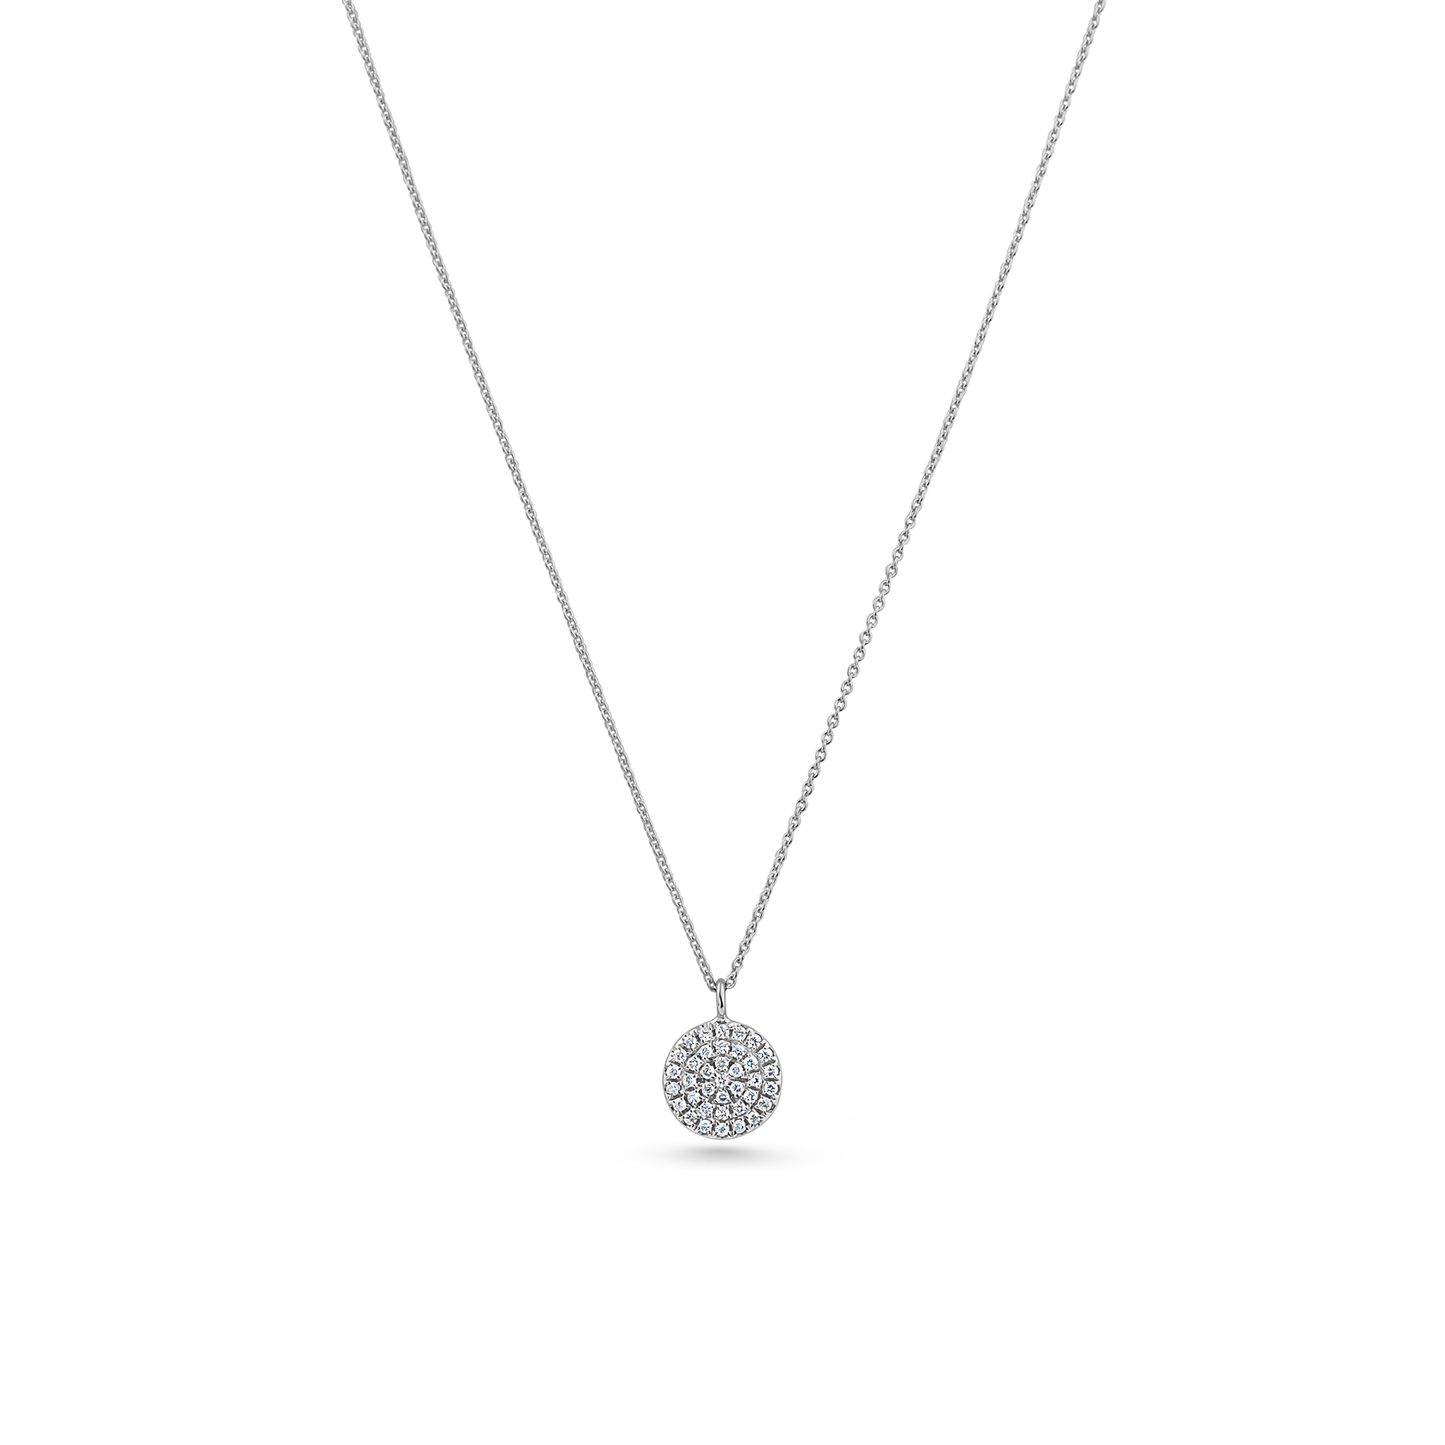 Oliver Heemeyer round tag diamond pendant made of 18k white gold. Pendant on a chain.